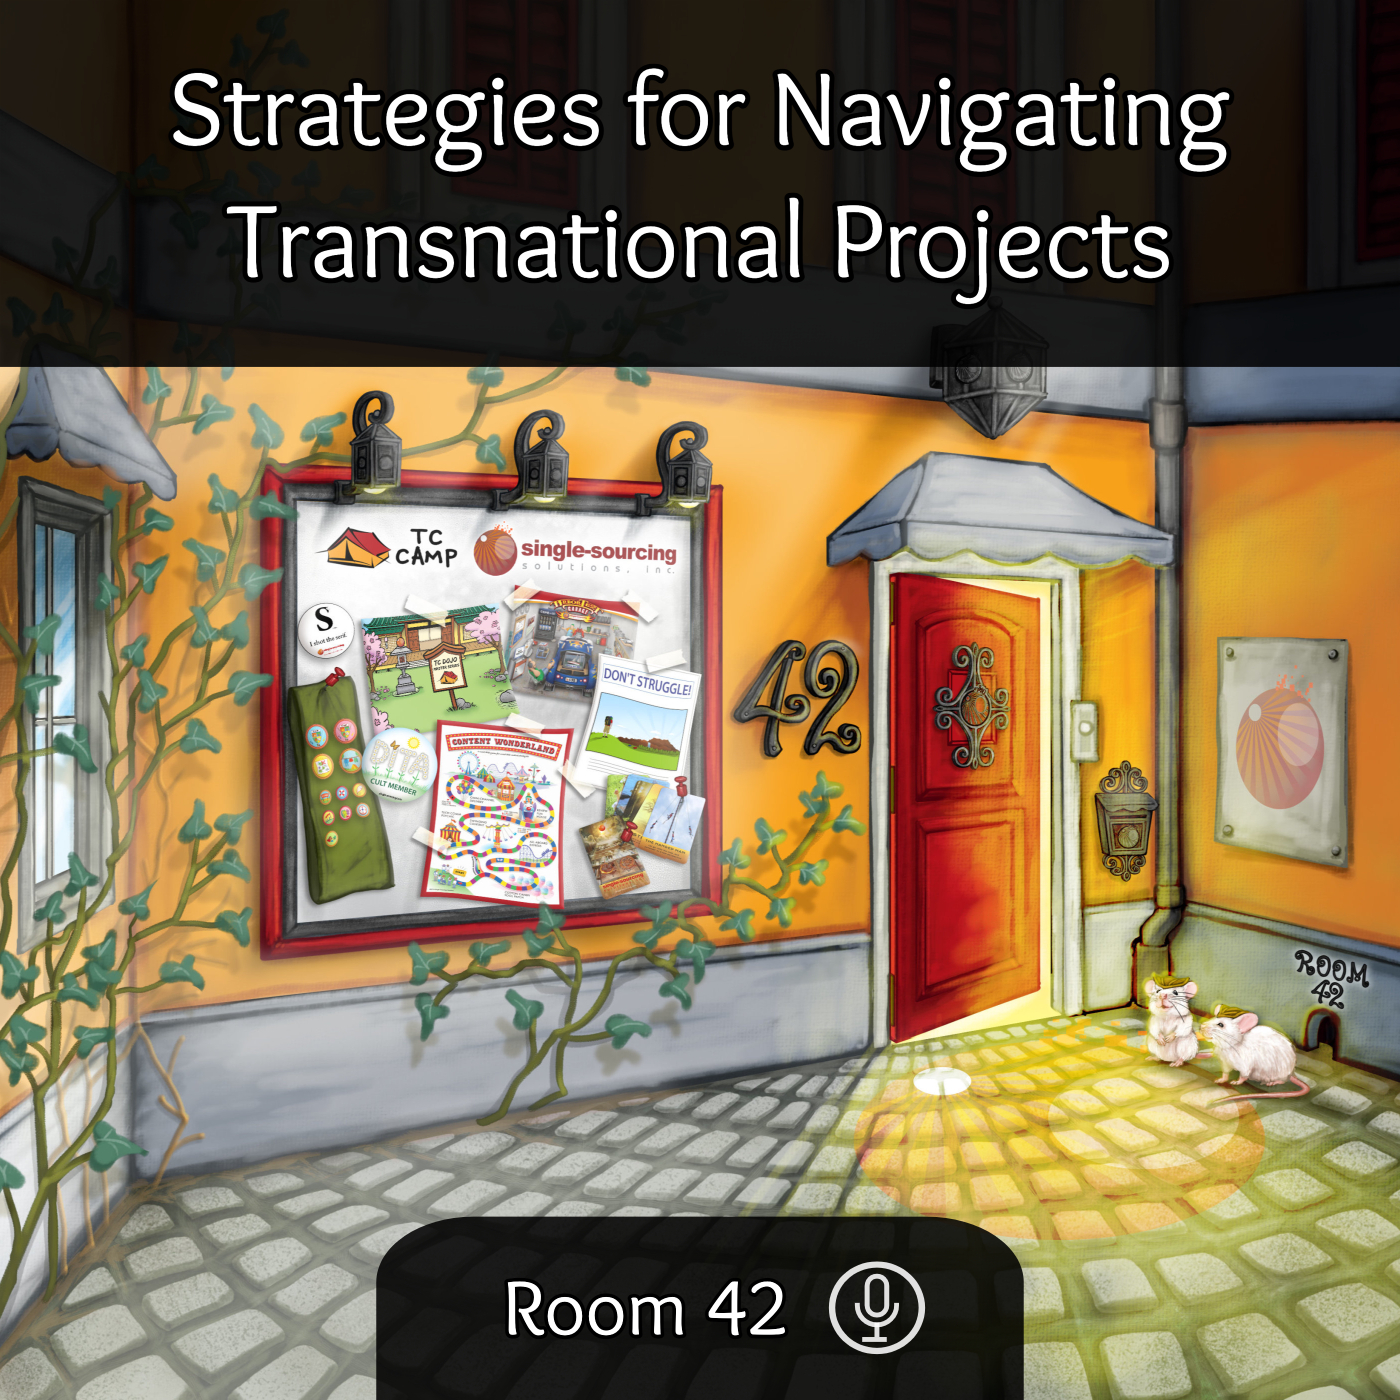 Strategies for Navigating Transnational Projects